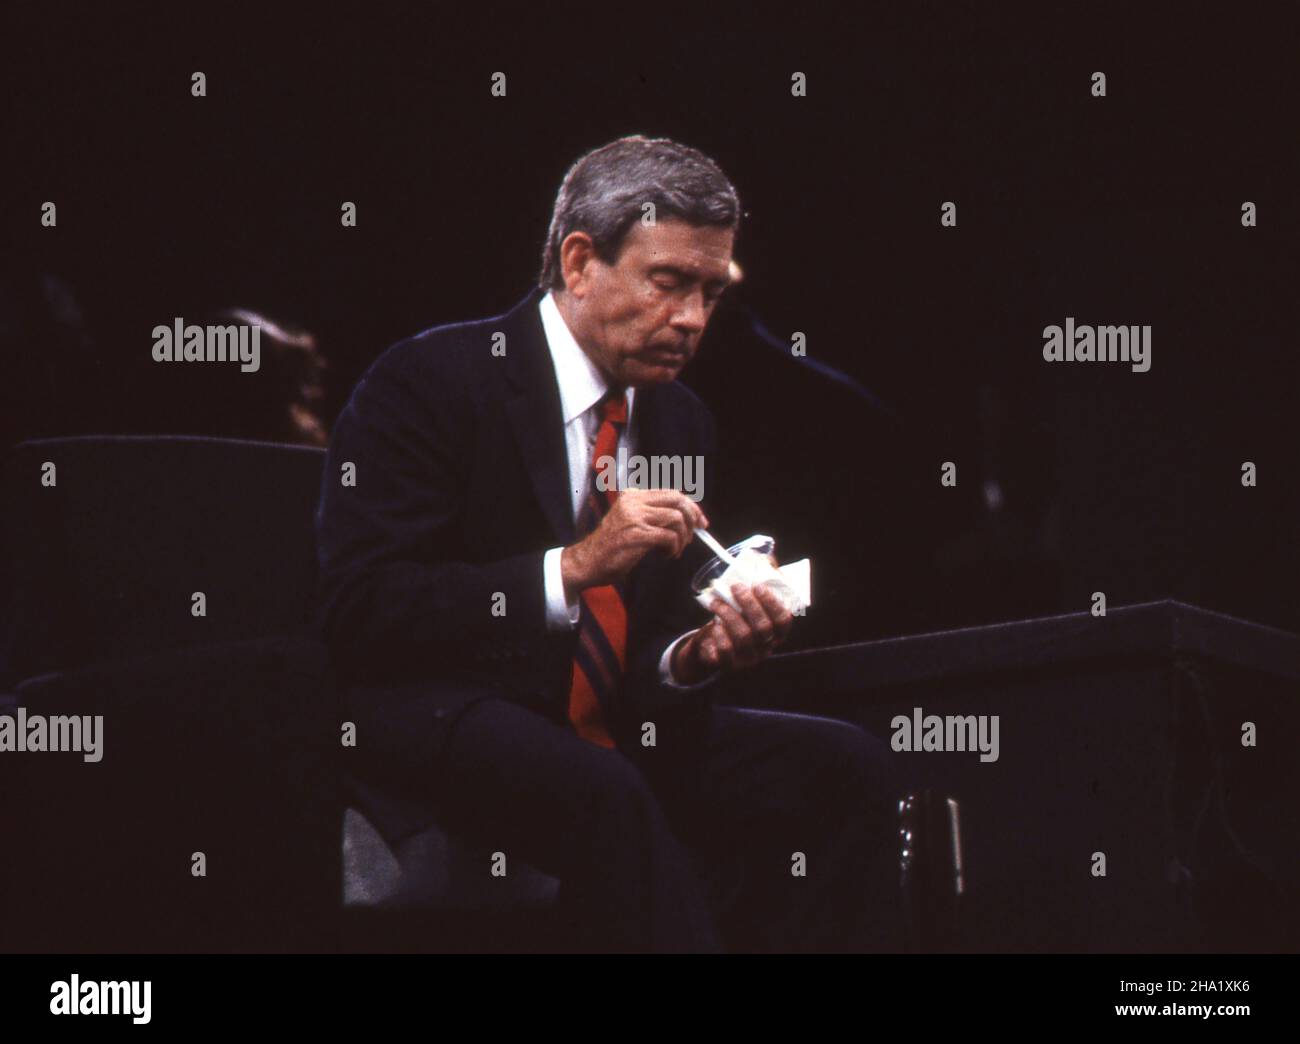 Dan Rather in the CBS anchor booth during an off air moment of the 1988 Democratic Convention.Photograph by Dennis Brack. bb80 Stock Photo